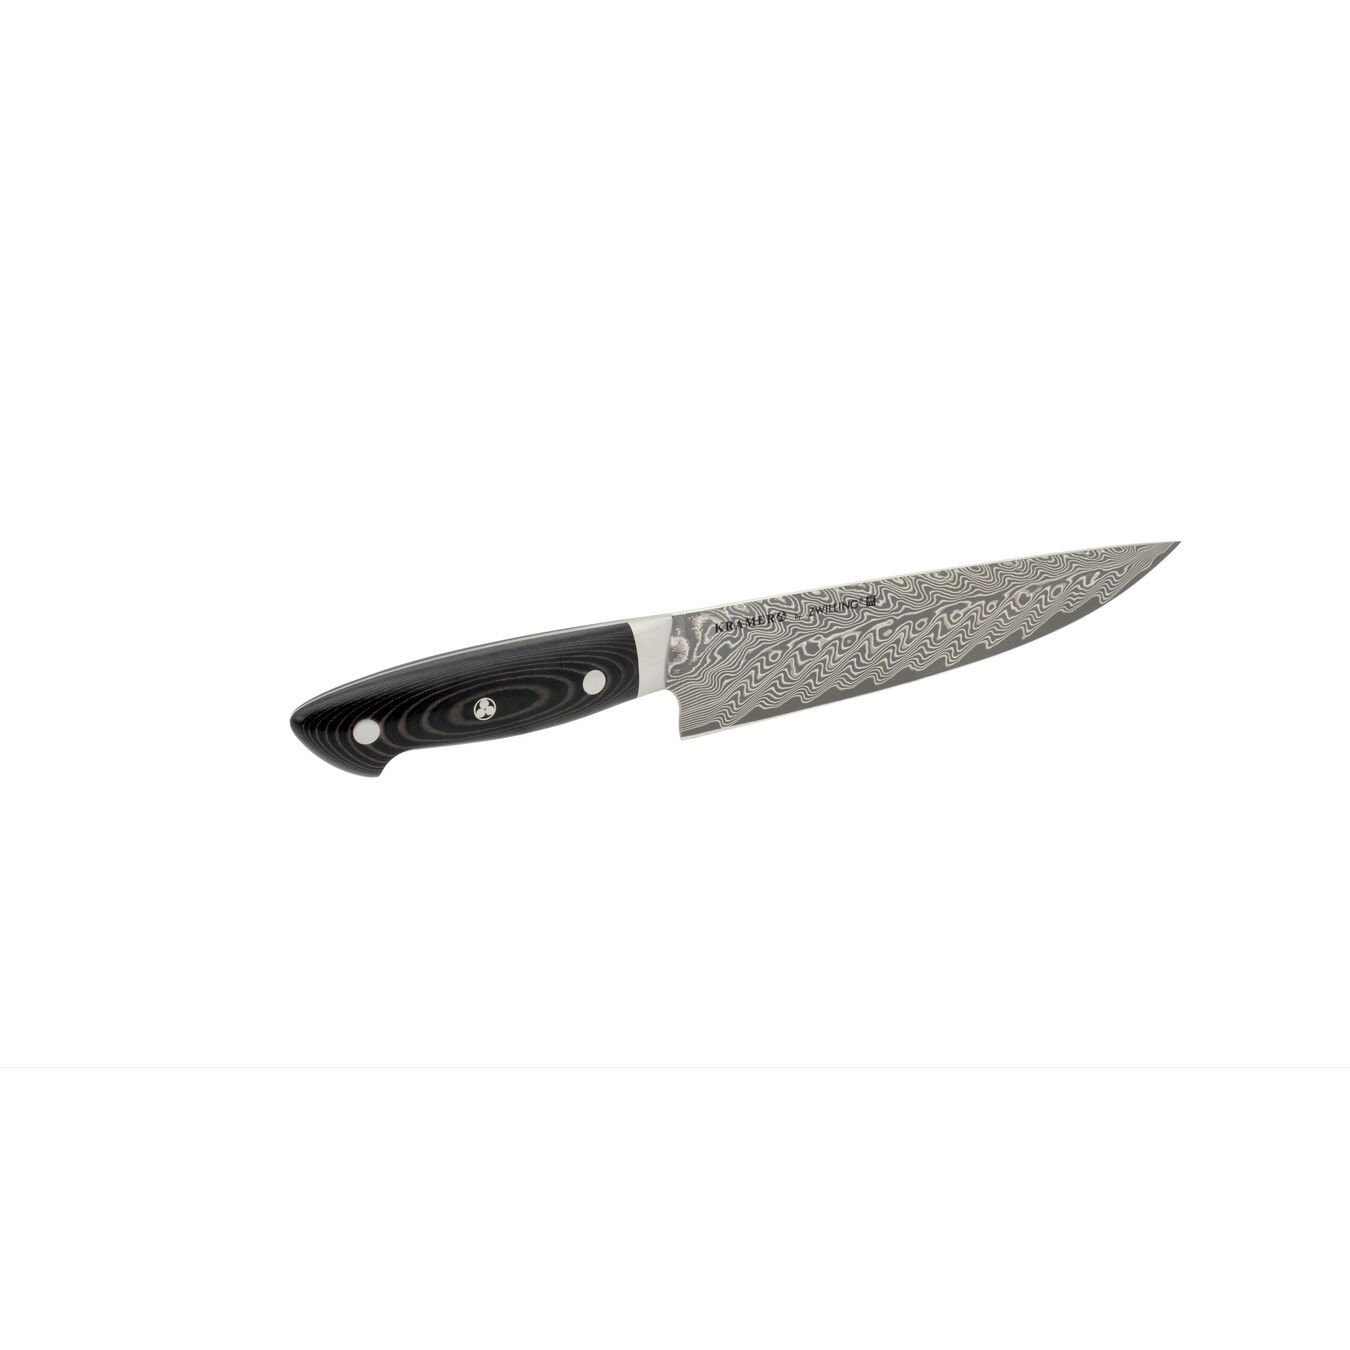 8-inch, Narrow Chef's Knife,,large 2